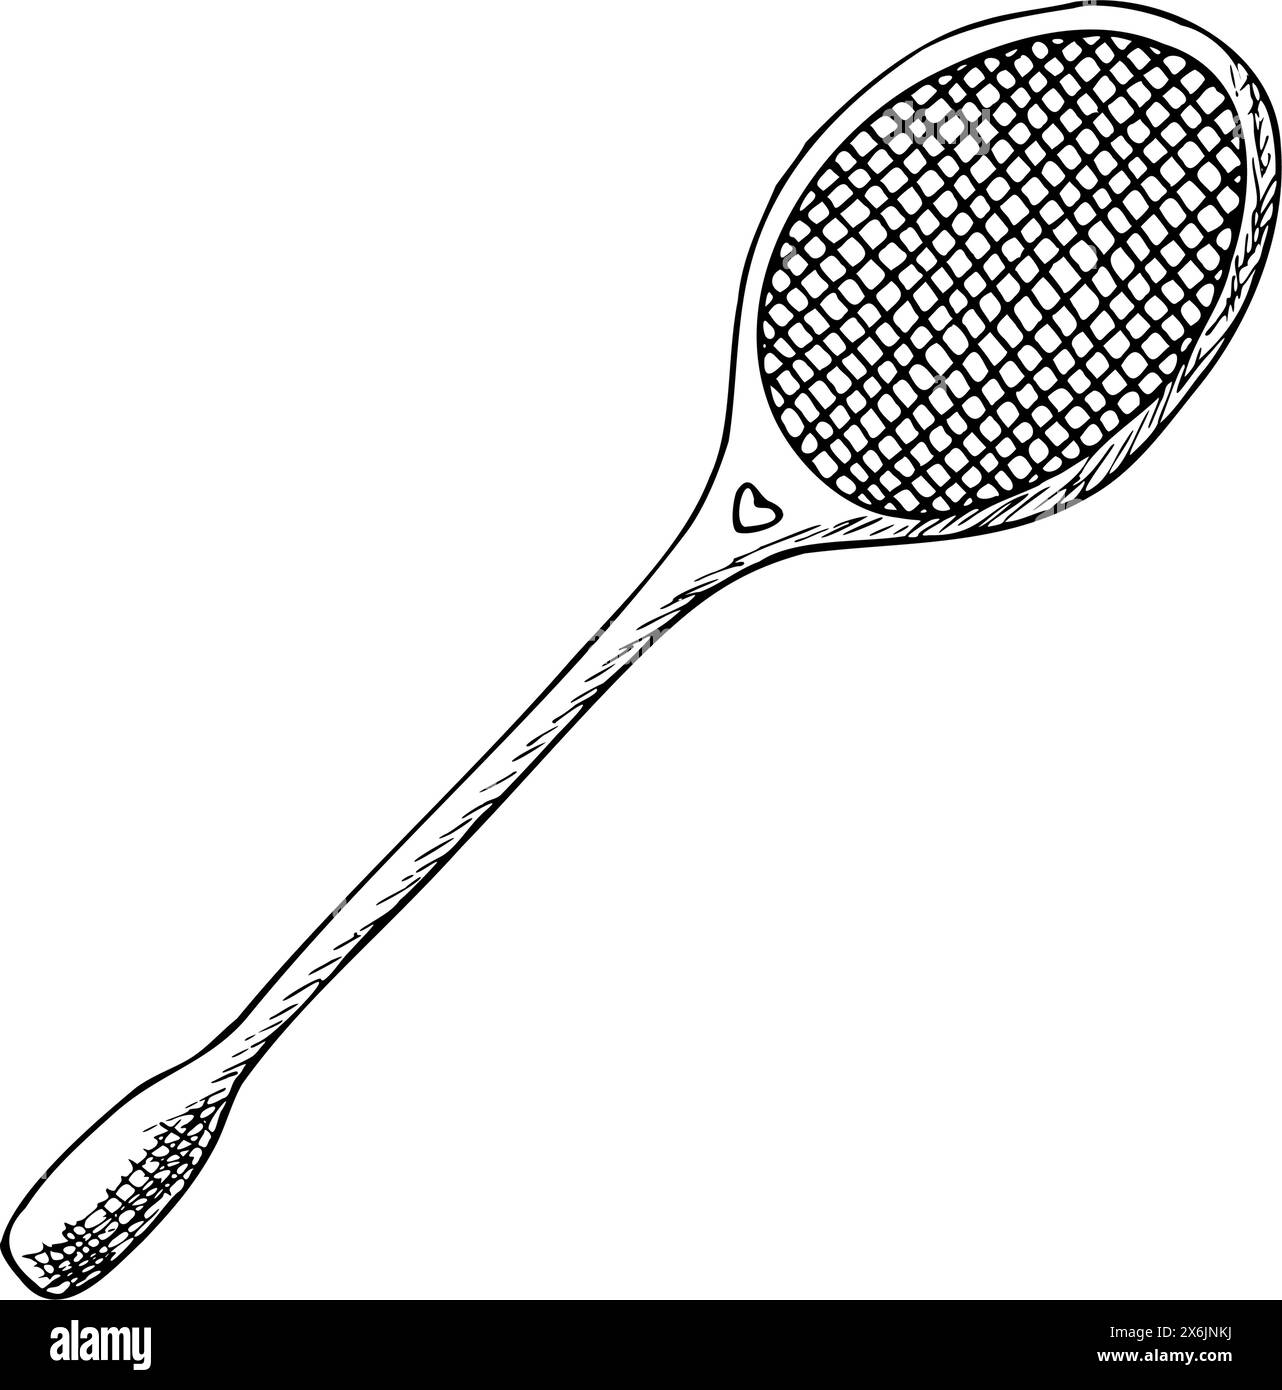 Badminton racket with heart, sports equipment. Hand drawn sketch isolated element for design Stock Vector